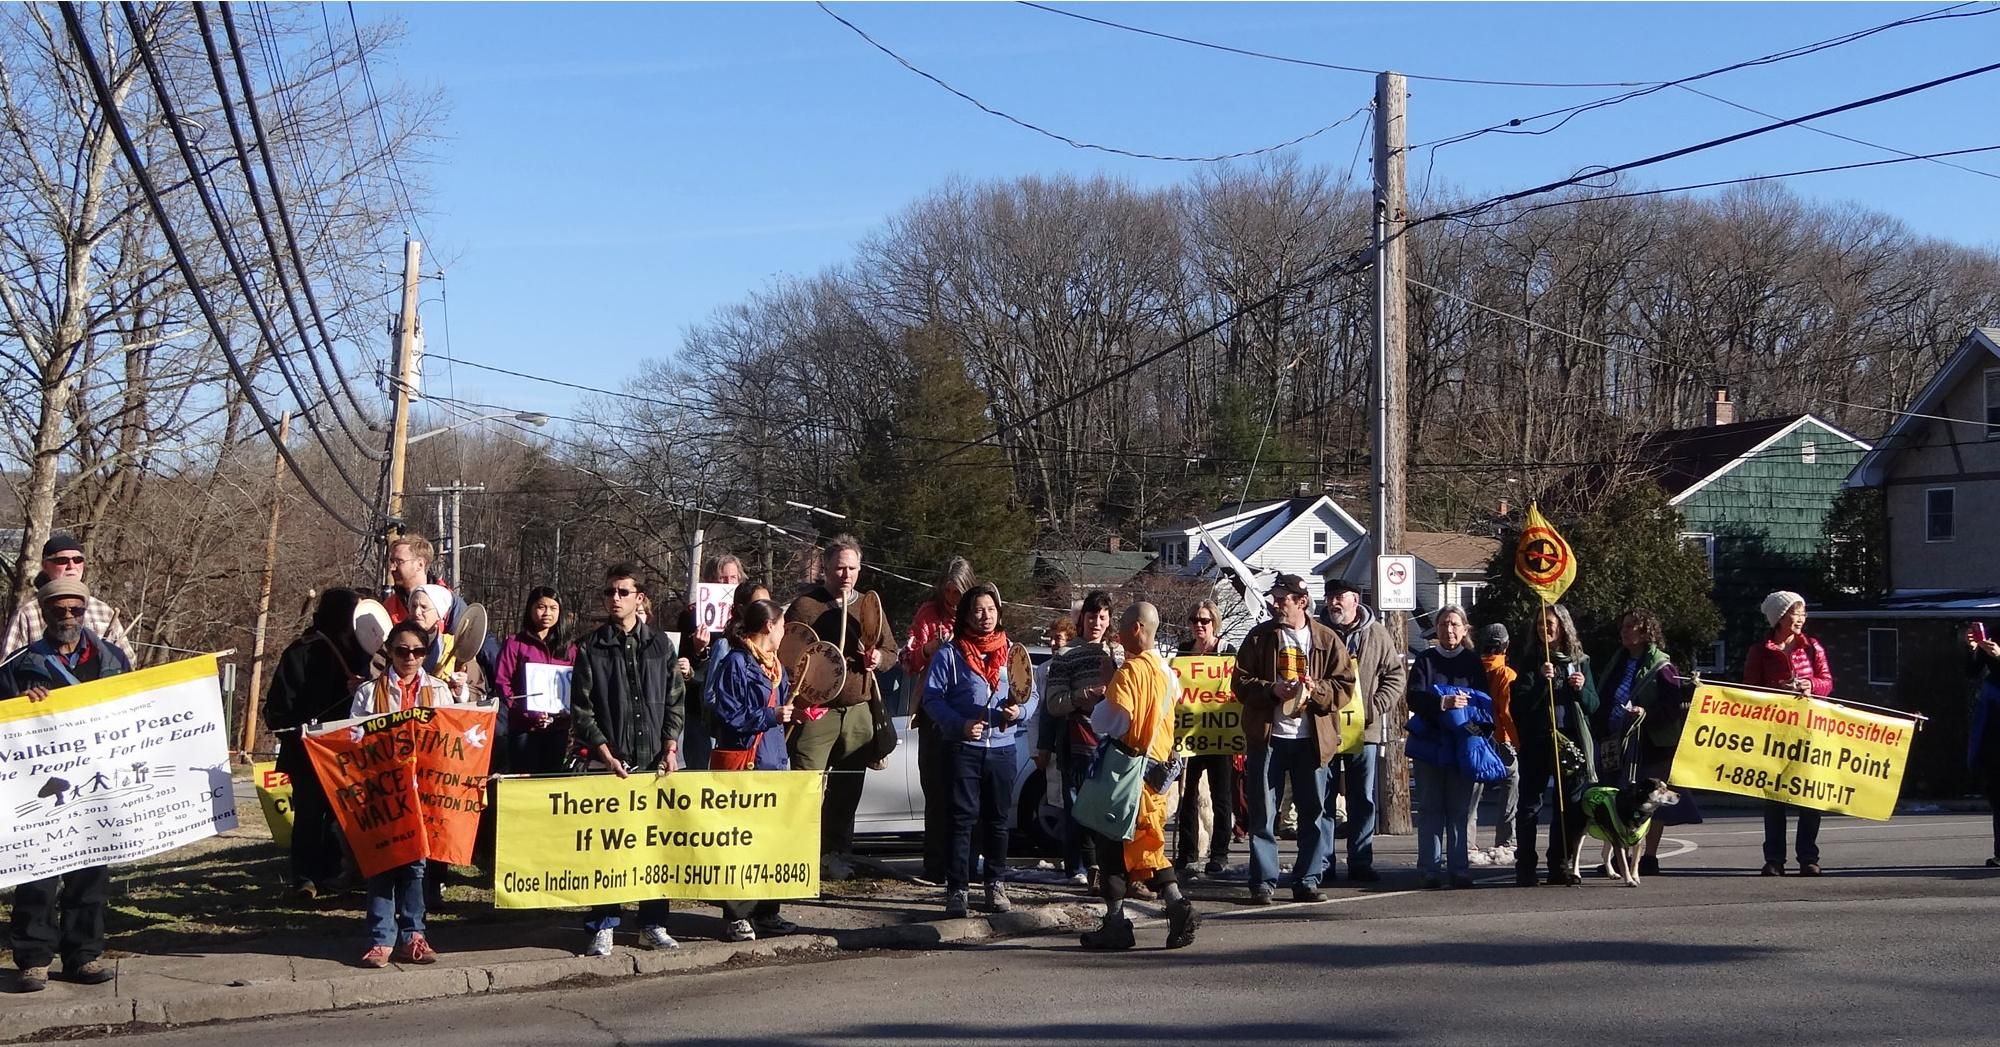 Community members participate in a March 9, 2013 "No More Fukushimas" and "Walk for a New Spring" protest in Croton-on-Hudson, New York in opposition to the Indian Point nuclear power plant. (Photo: Vanessa/Flickr/cc)